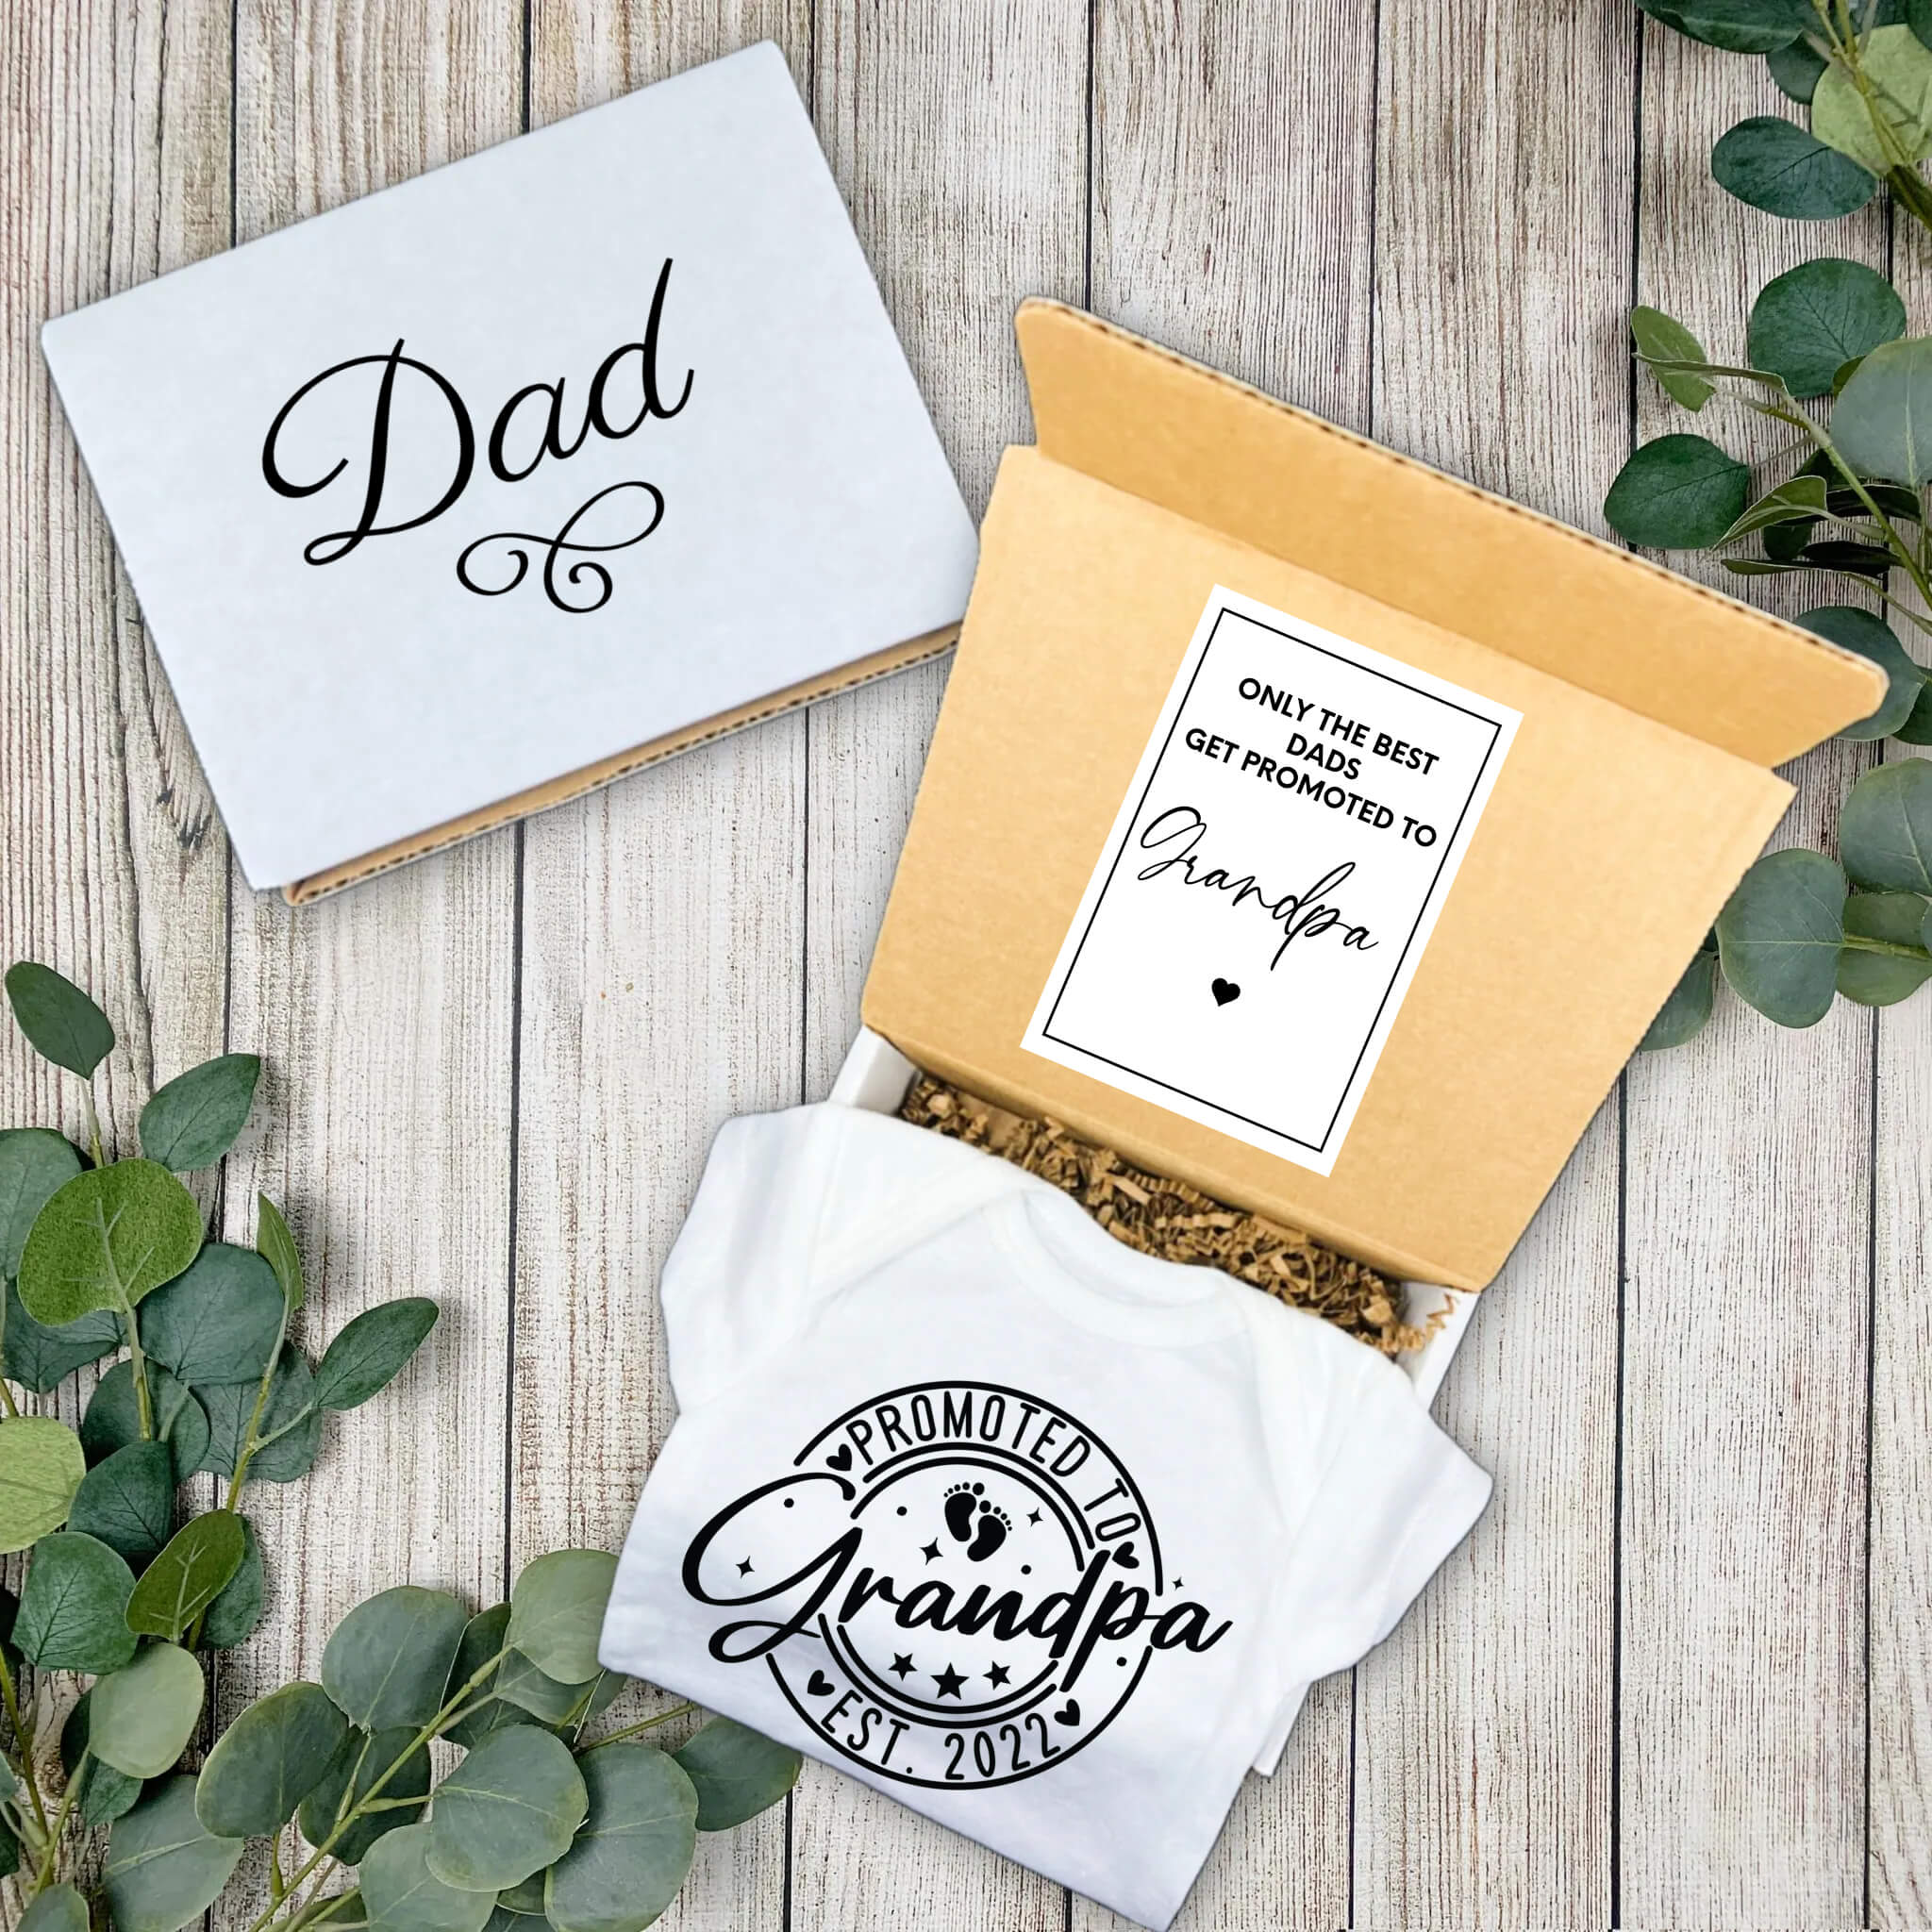 Personalized Pregnancy Announcement, Grandpa To Be, Papa, Pops, Gpa, Customized Baby Announcement Onesie, Personalized Pregnancy Announcement Gift Box, Personalized Baby Announcement Gift Box